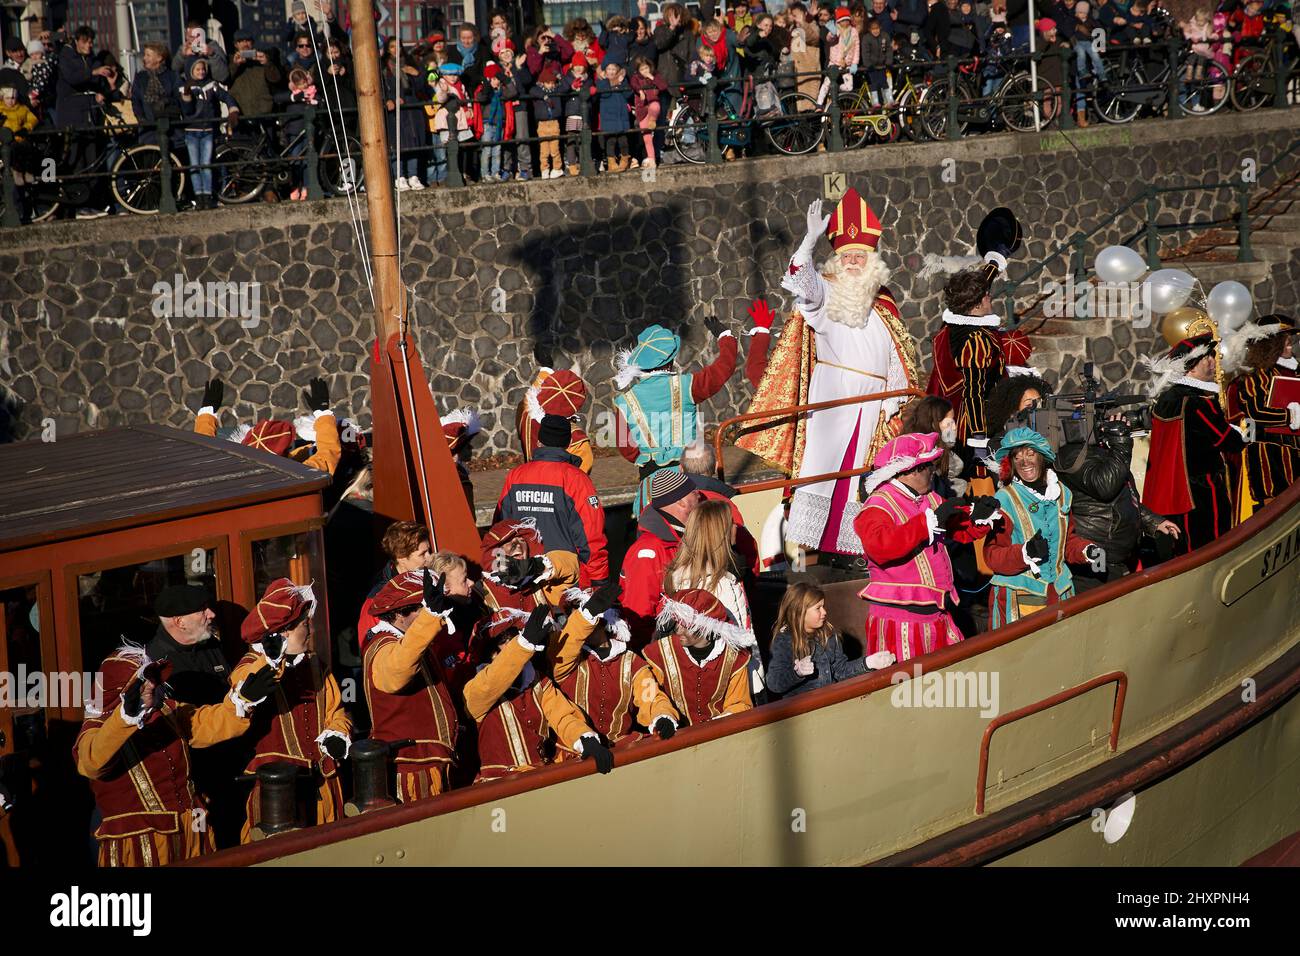 St. Nicholas arrives on his boat sailing the canals of Amsterdam Stock Photo